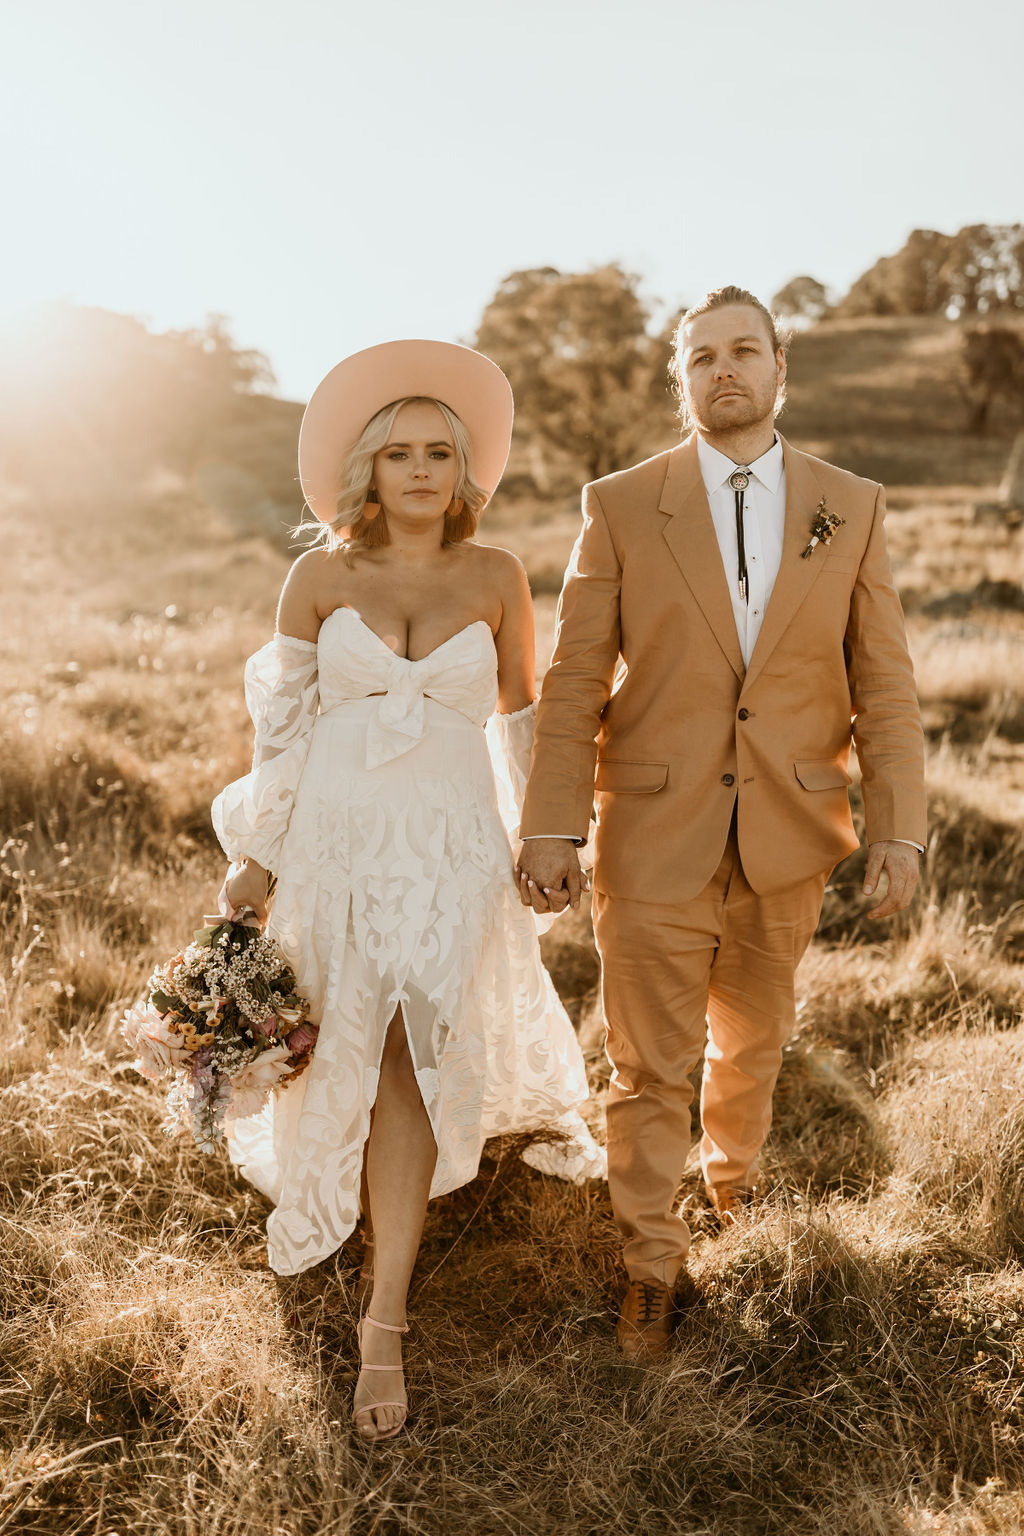 images by kacie herd photography gown by rue de seine central west NSW bridal shoot